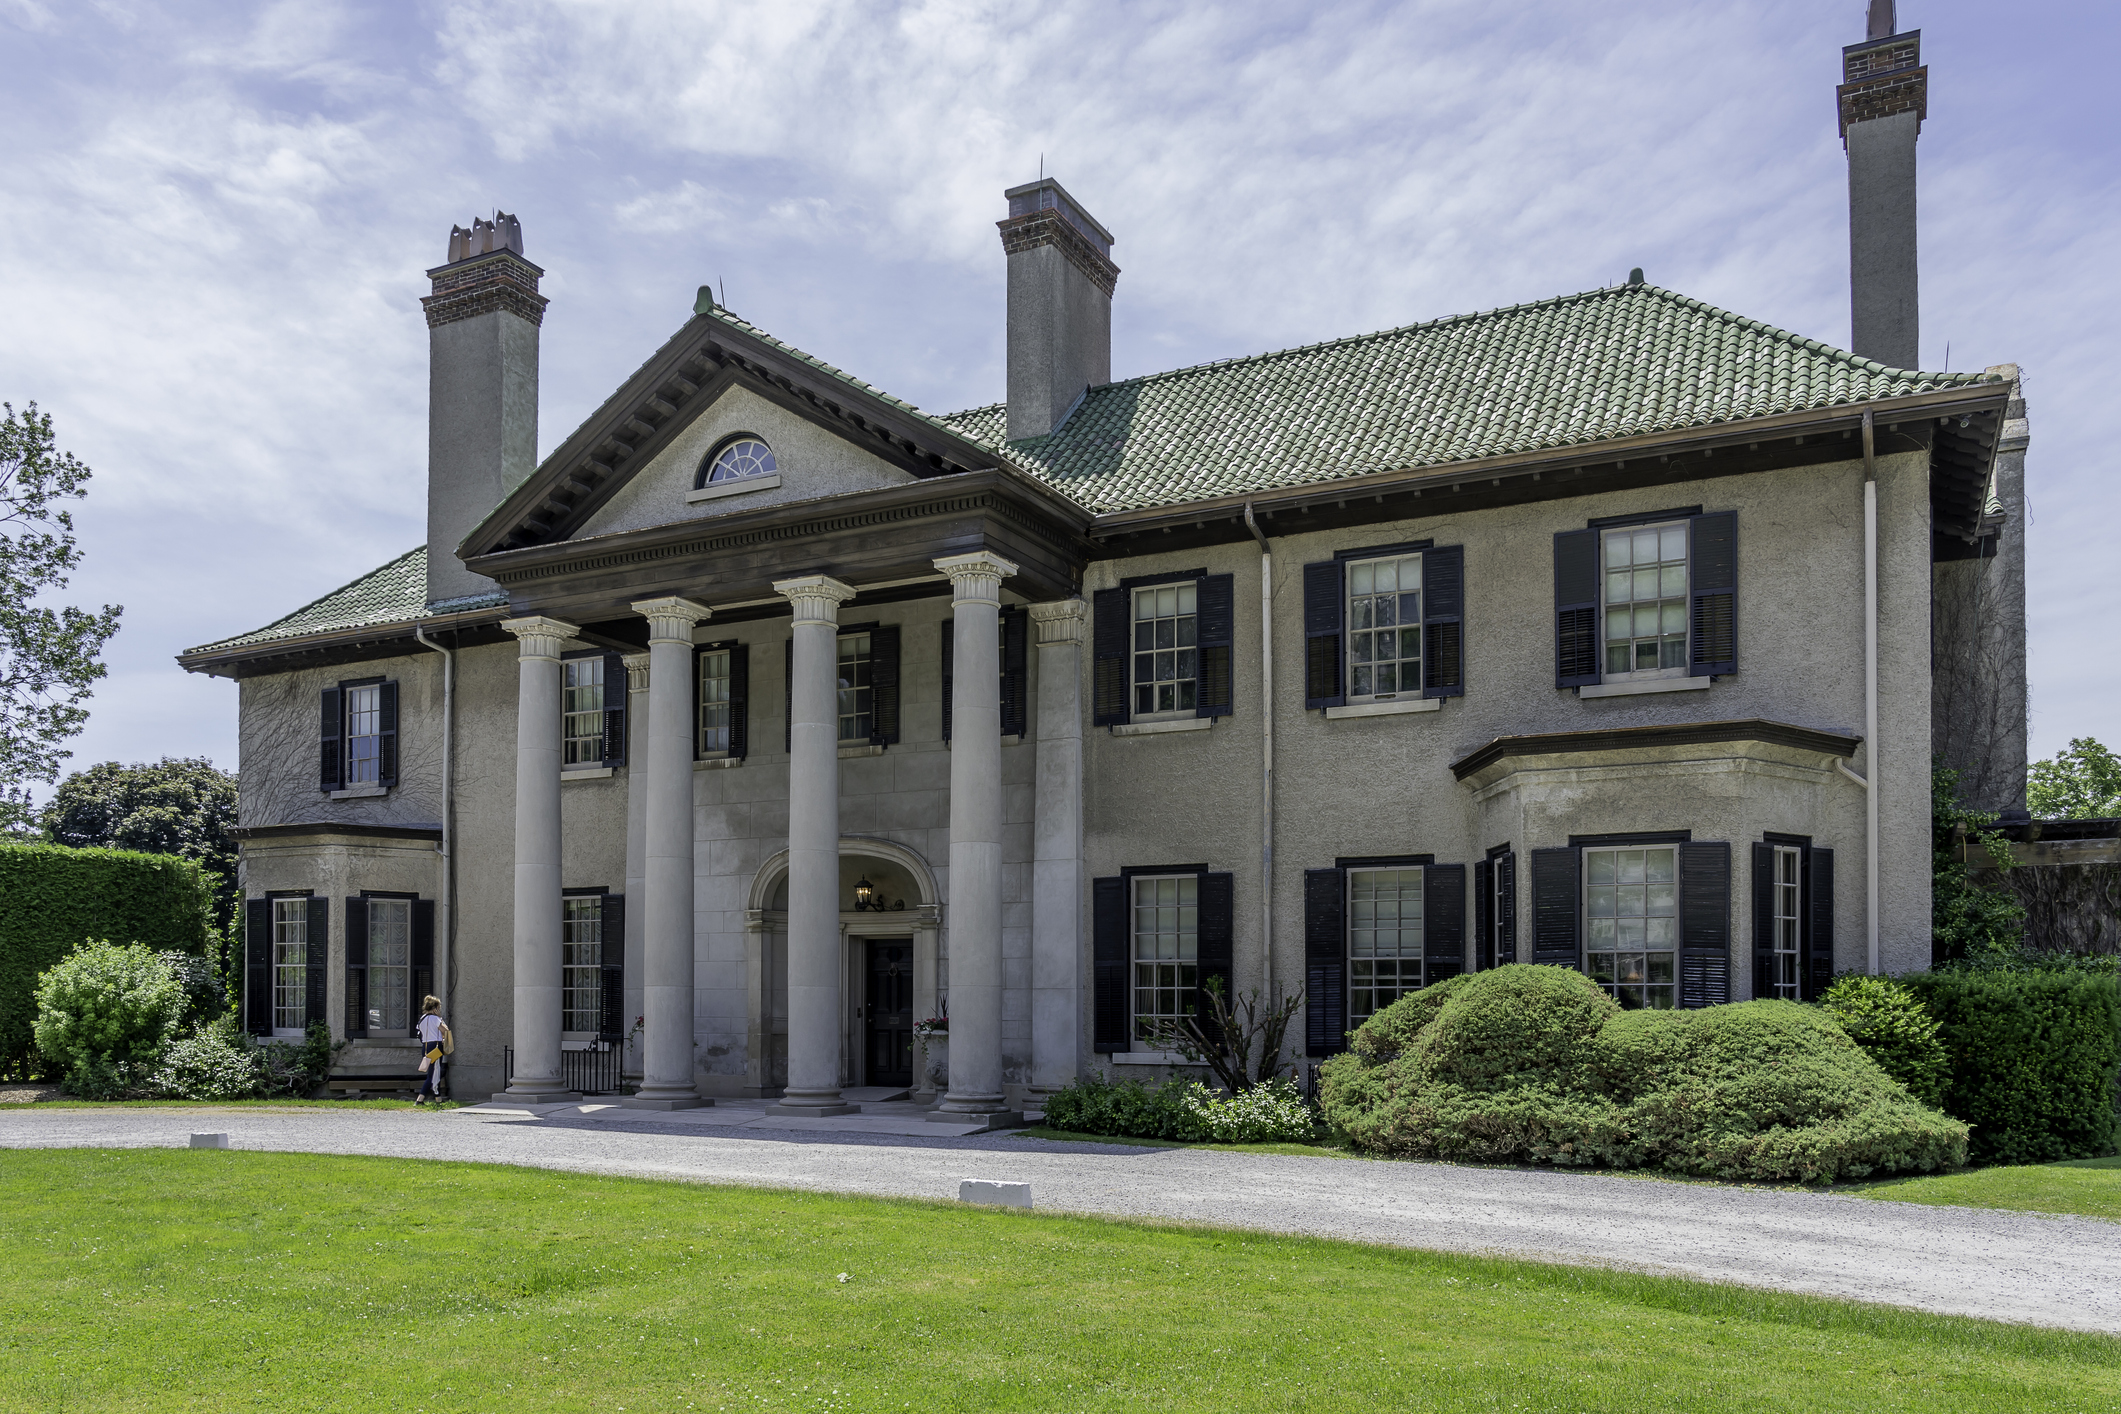 Oshawa, Ontario, Canada - July 01, 2019: Building at Parkwood Estate in Oshawa, Ontario, Canada. Parkwood Estate was the residence of Samuel McLaughlin, now is a a National Historic Site.